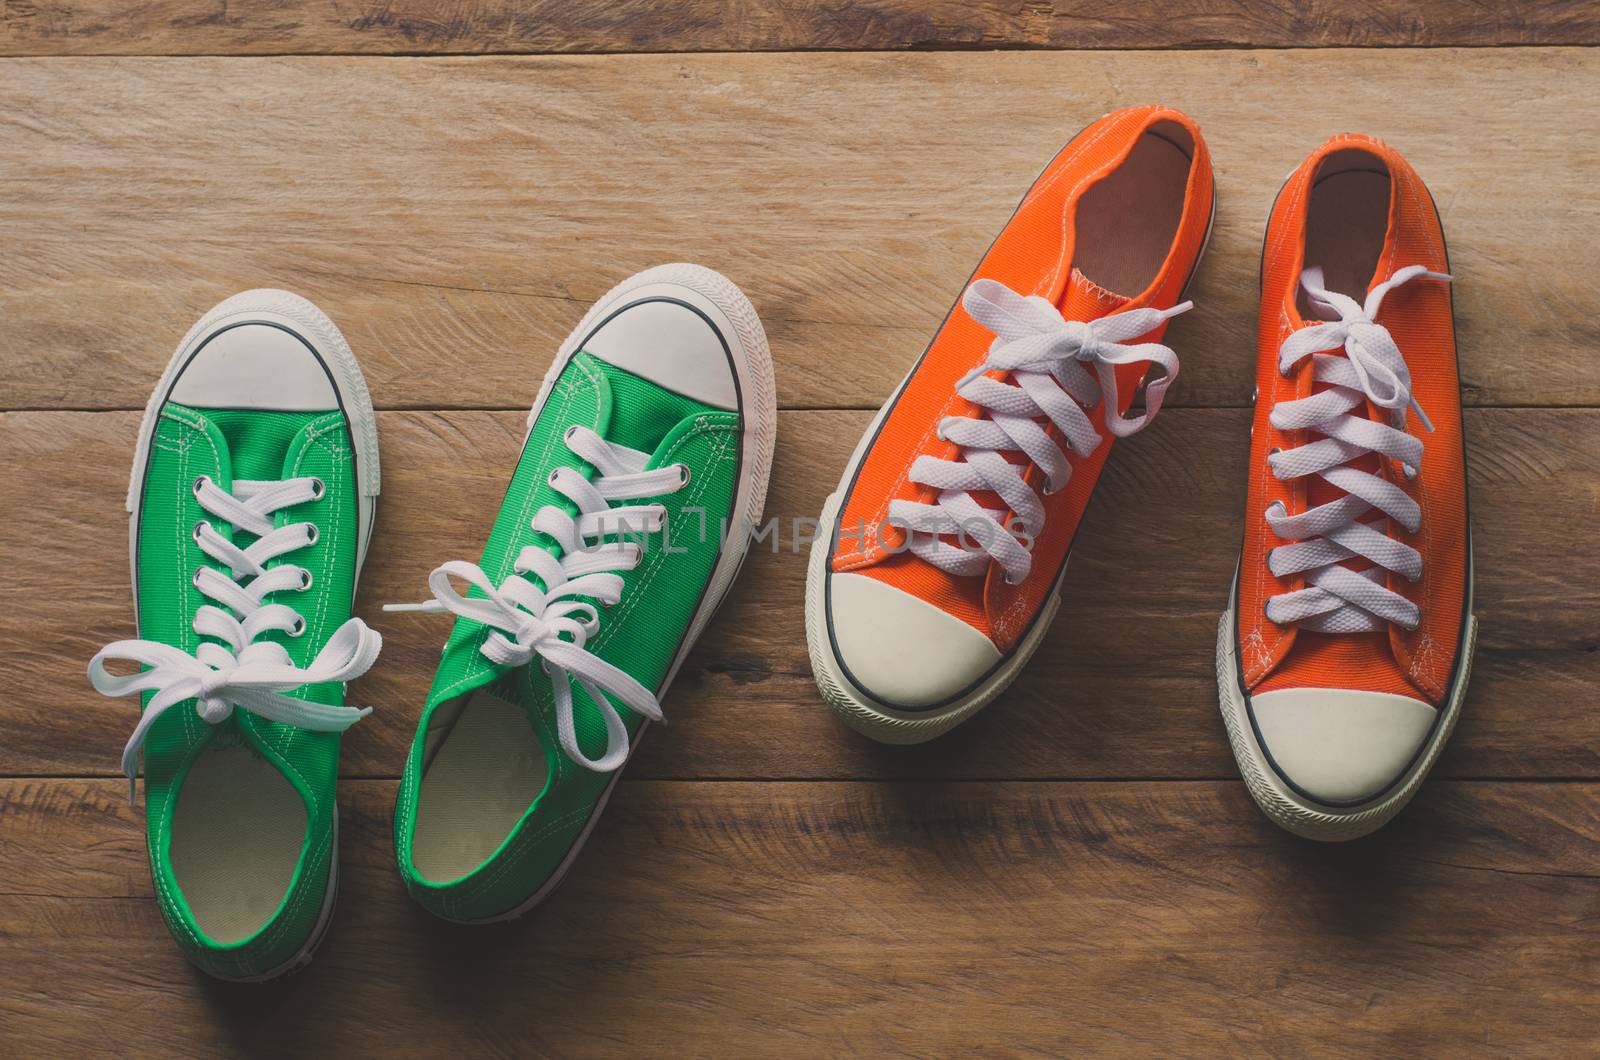 Red and Green sneakers on wooden floors - lifestyle by photobyphotoboy